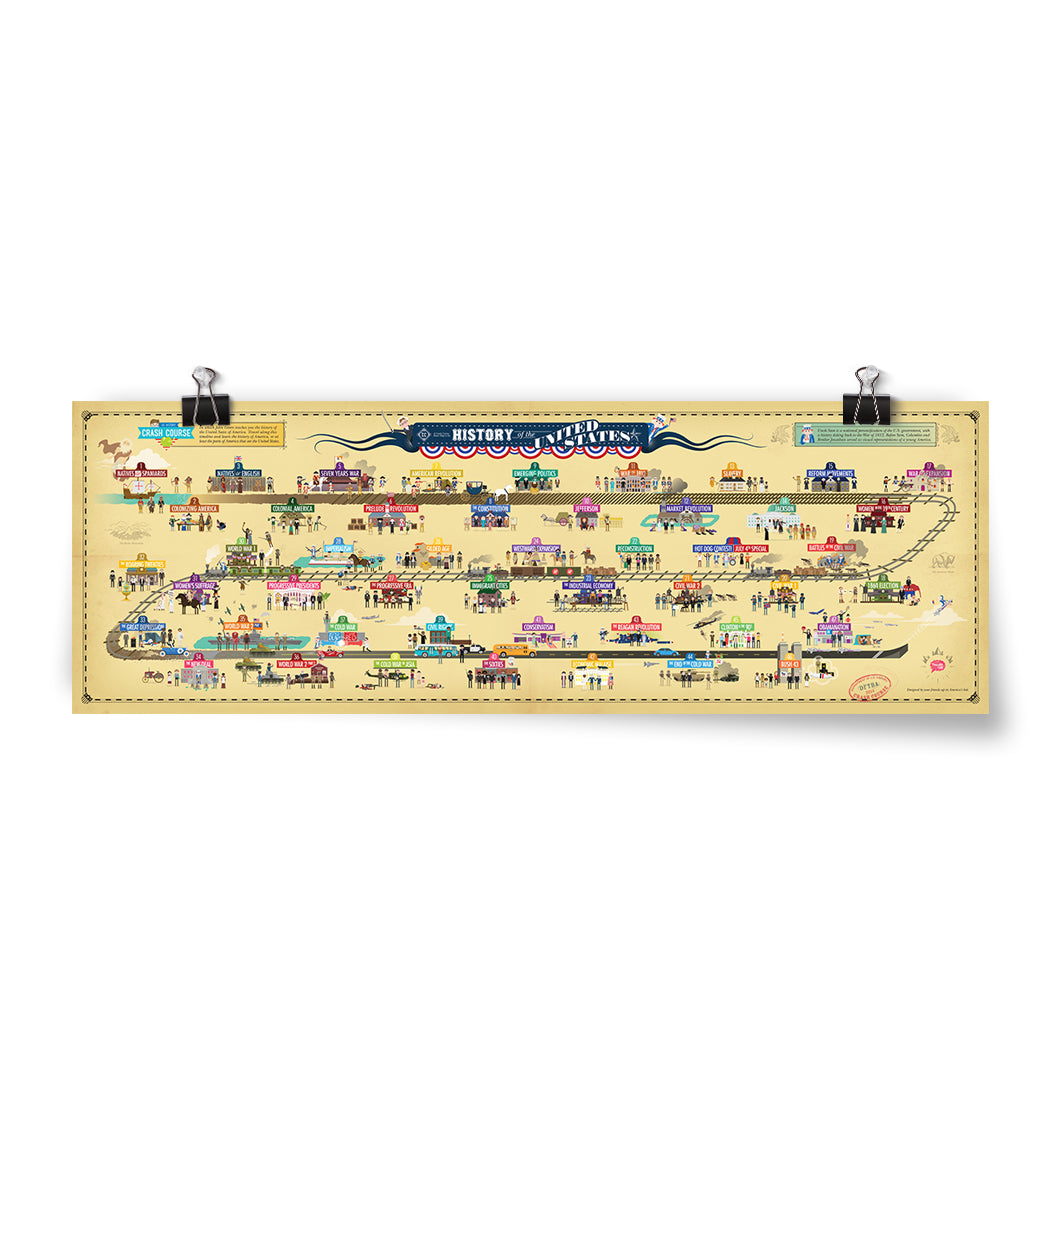 Poster featuring a timeline in 3 horizontal lines with drawings of events along it. By CrashCourse